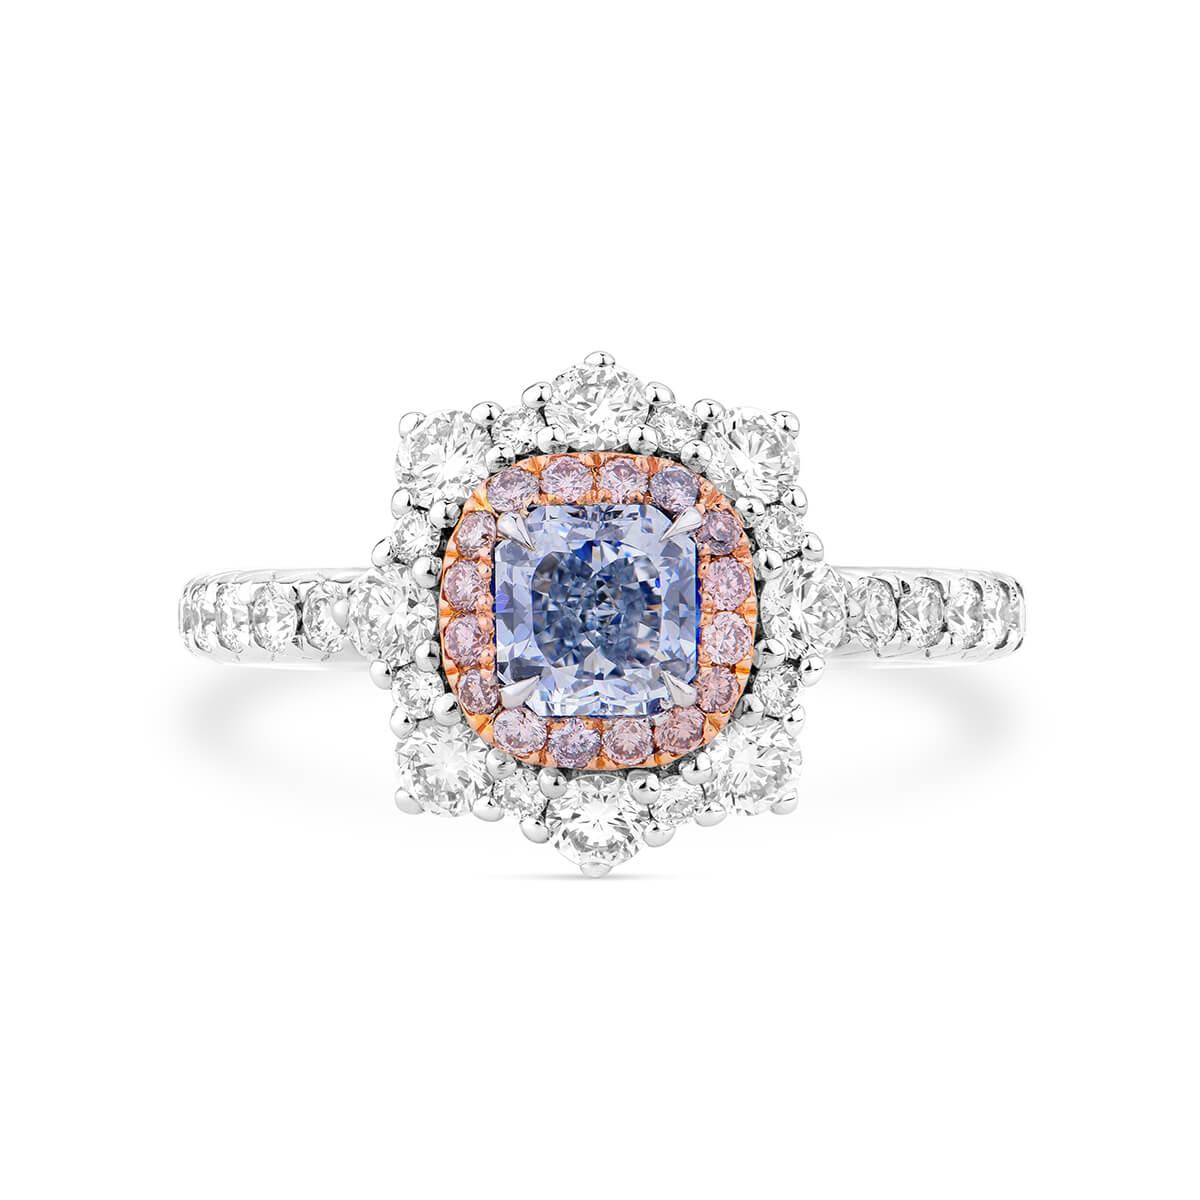 Red White and Blue Diamond On a C Logo - 0.61Ct Light Blue Diamond Ring Cushion Halo Flower Design 18K Red ...